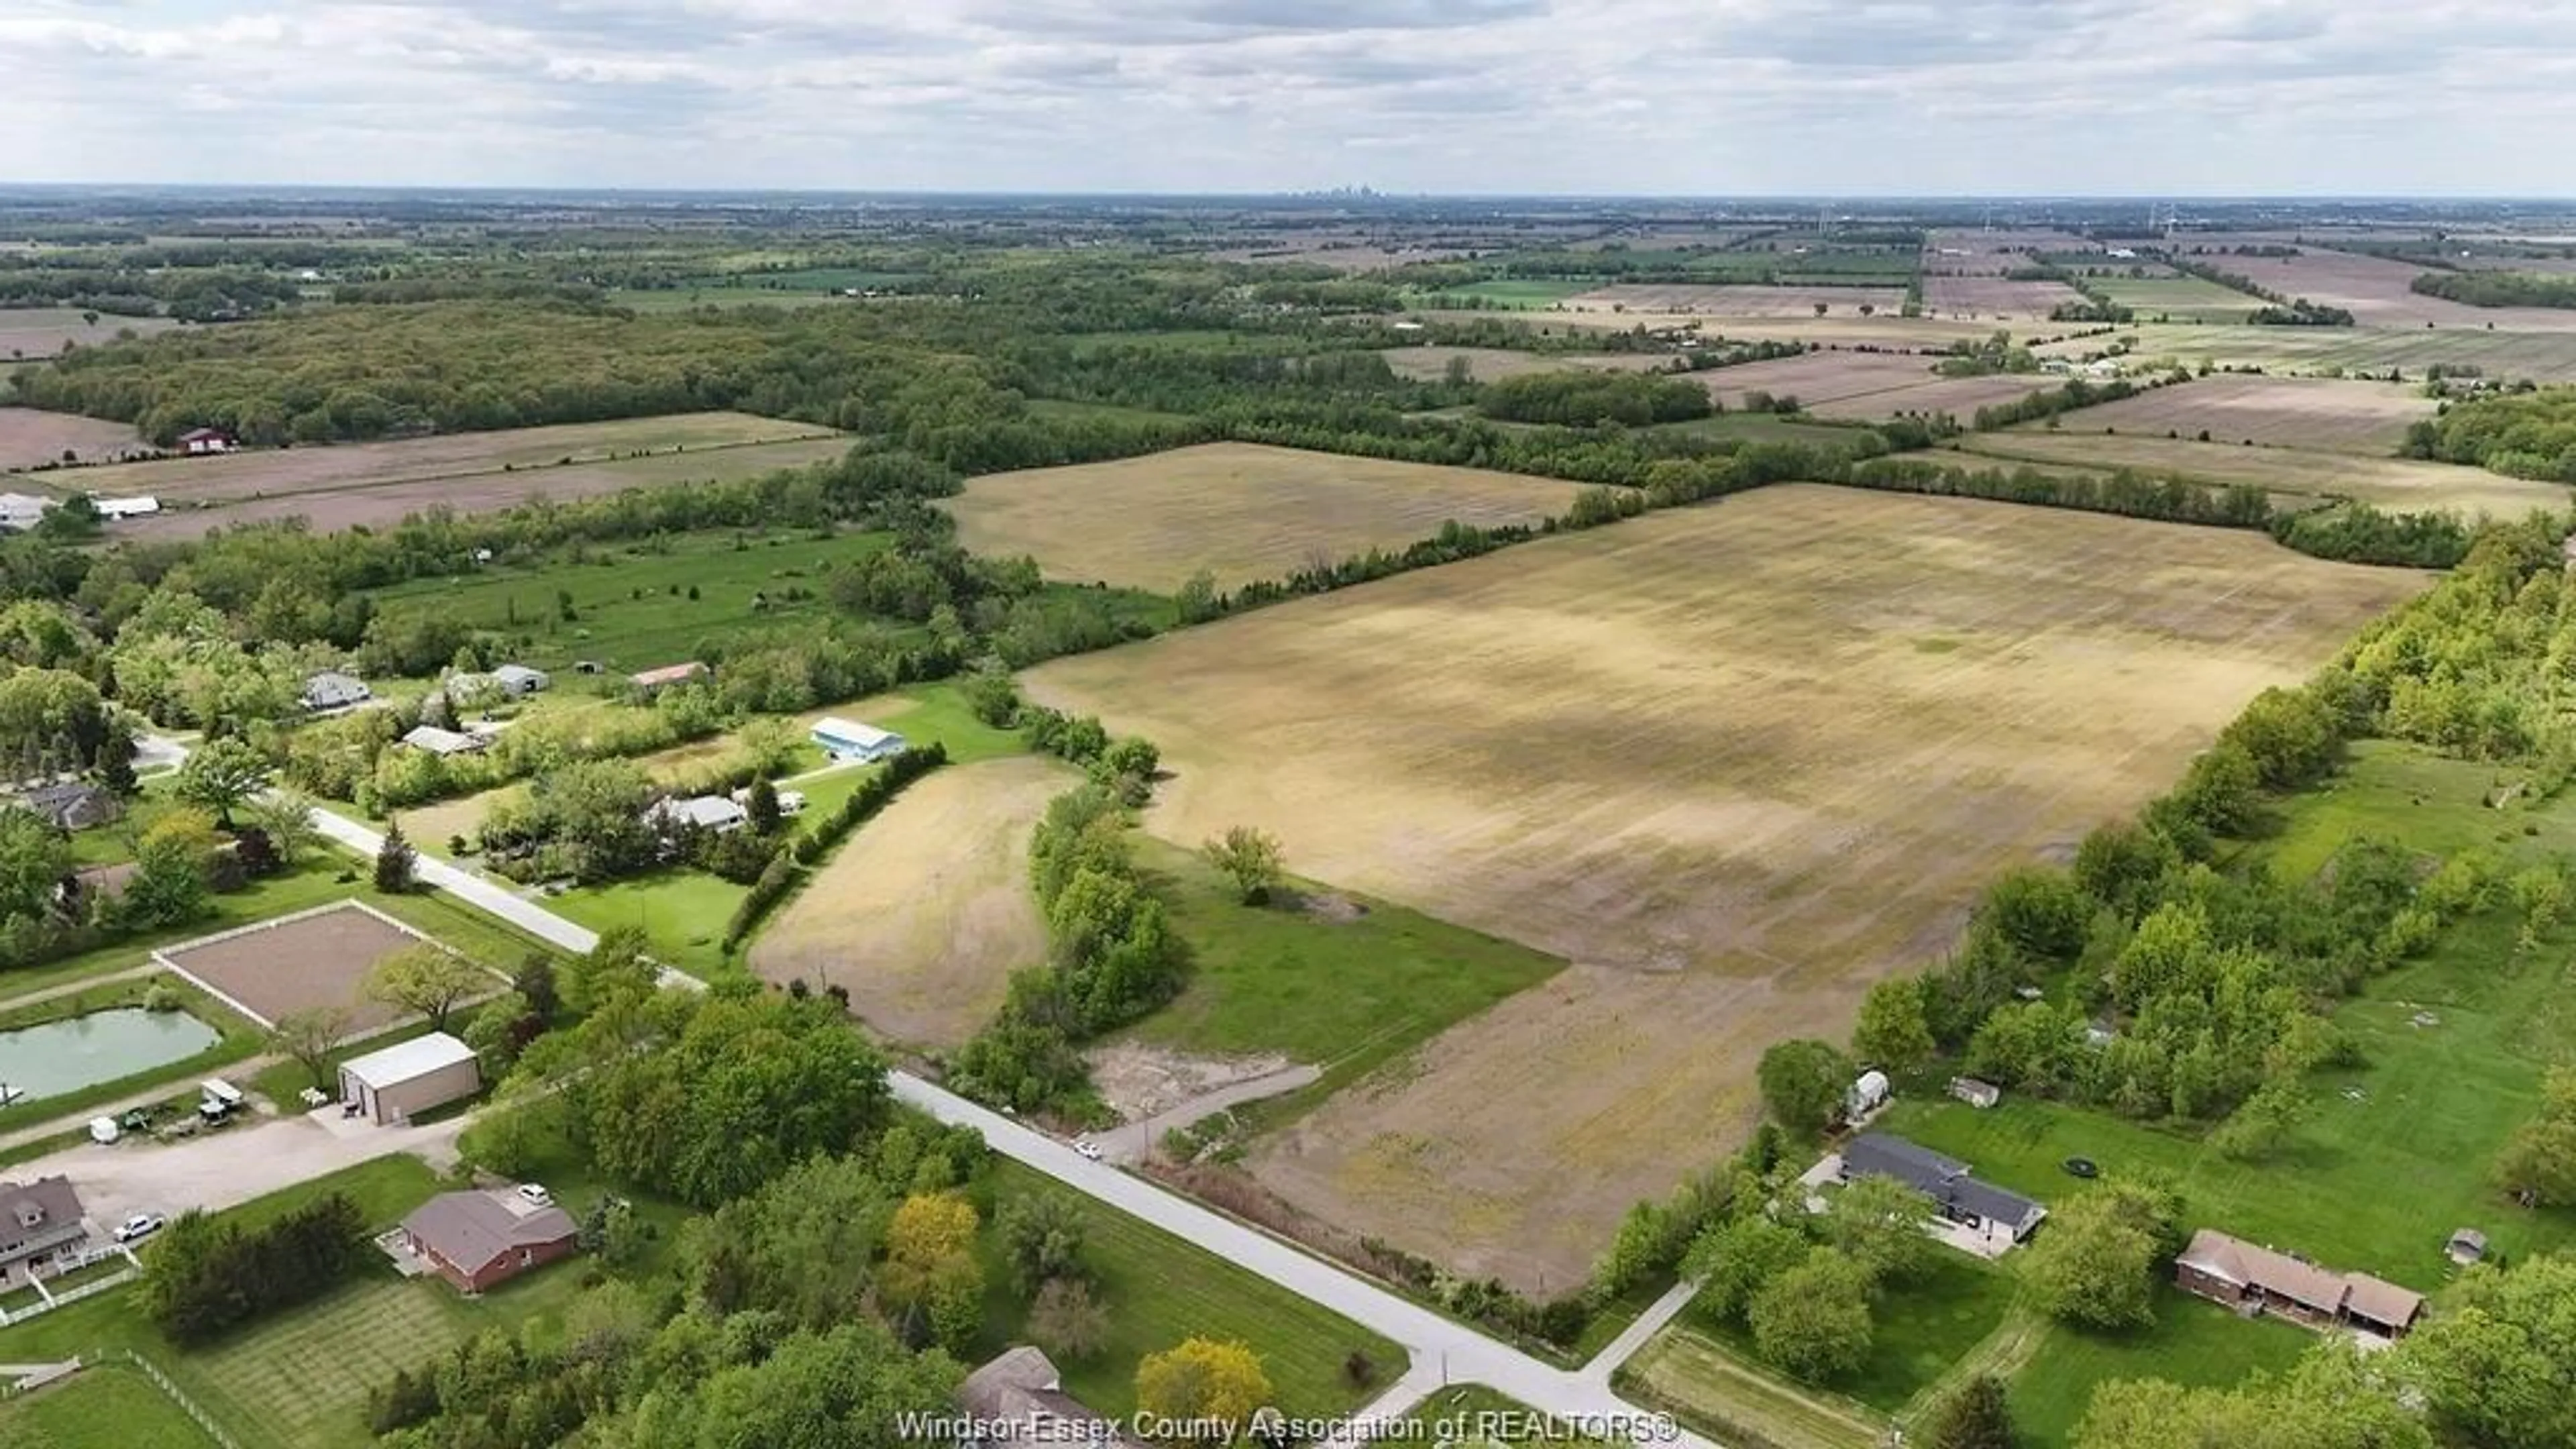 Lakeview for V/L 9TH CONCESSION Rd, Essex Ontario N8M 2X5